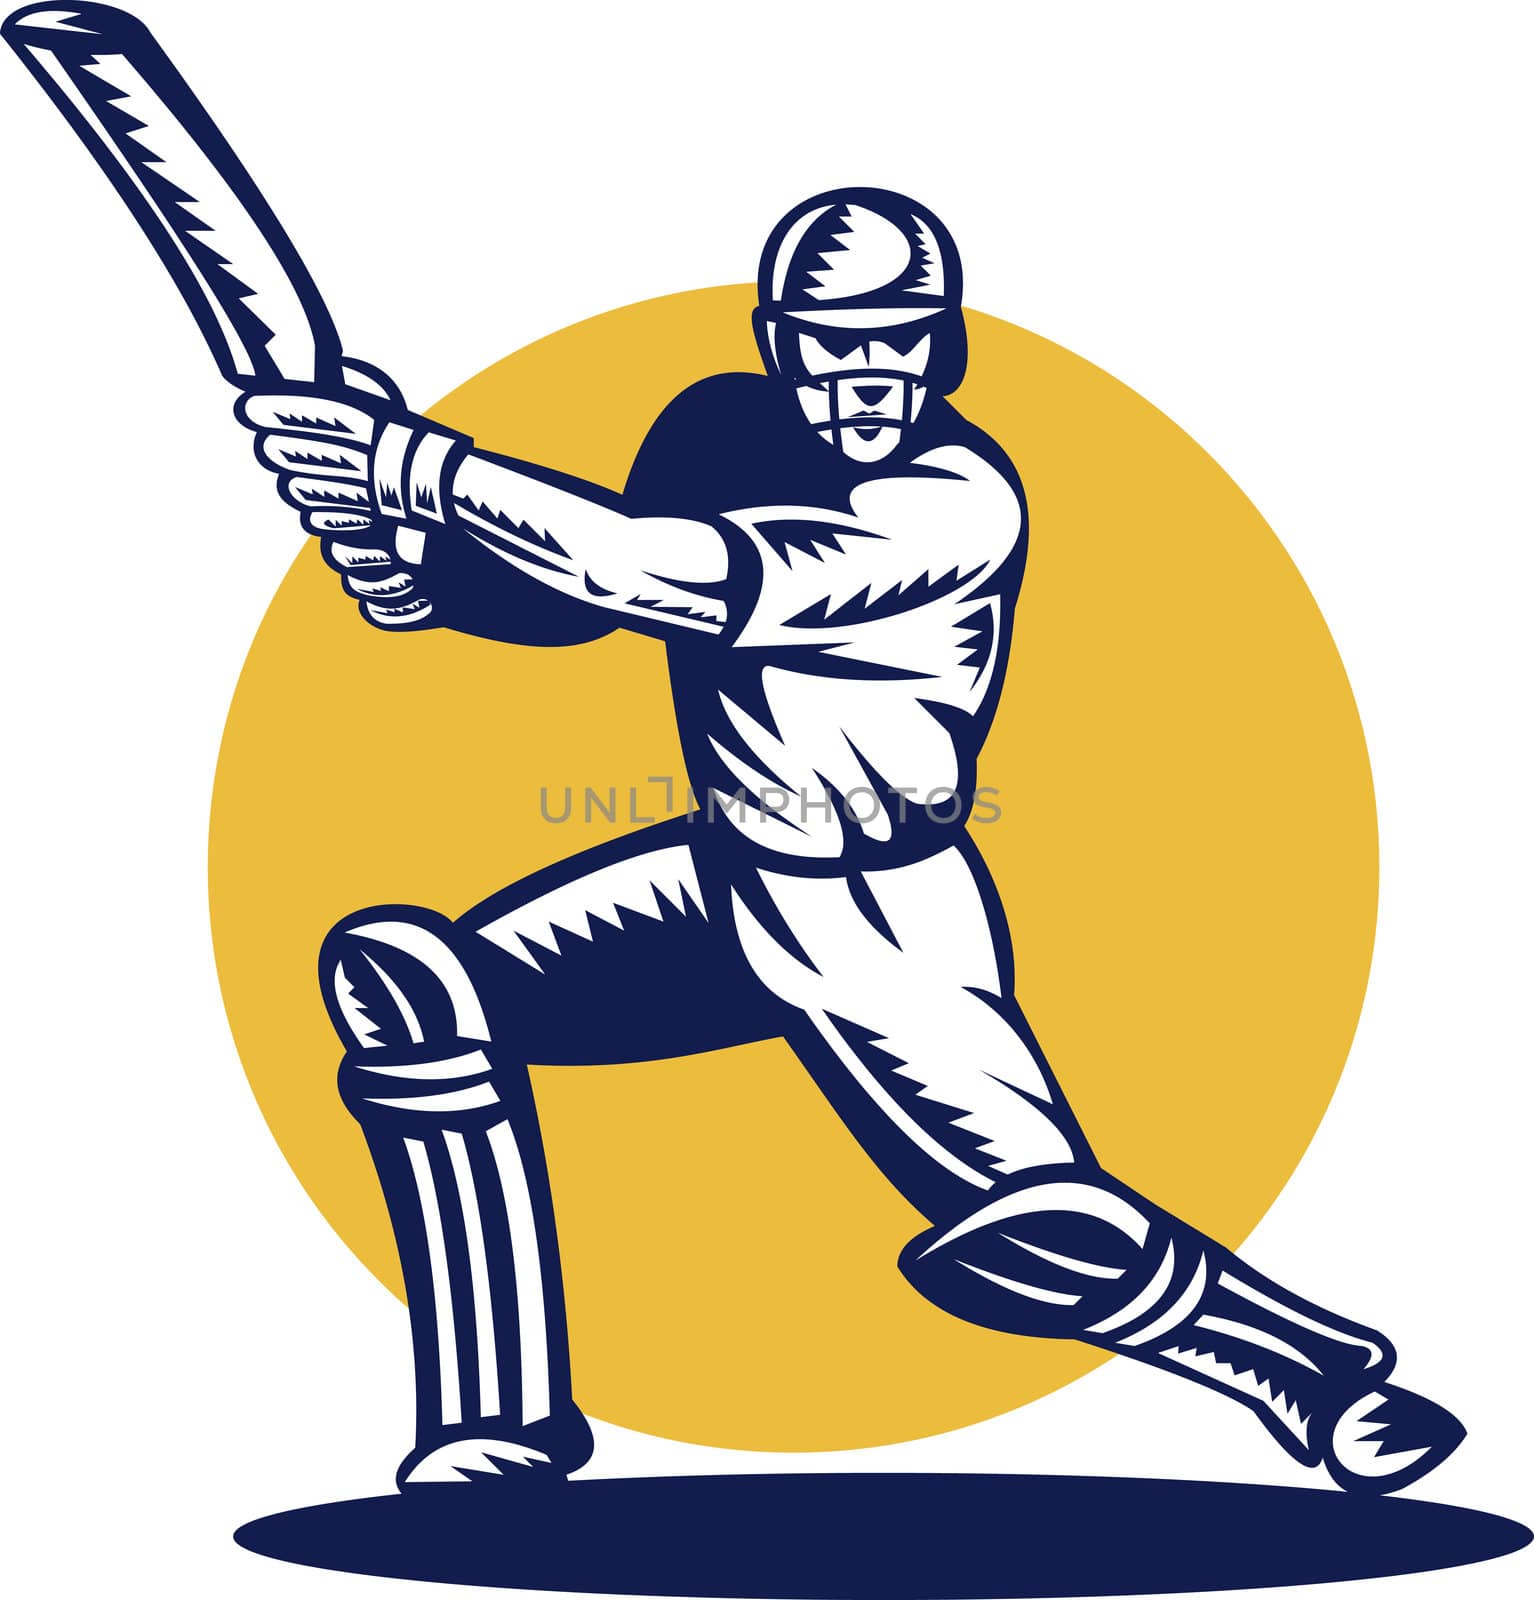 retor style illustration of a cricket sports batsman batting front view done in retro style